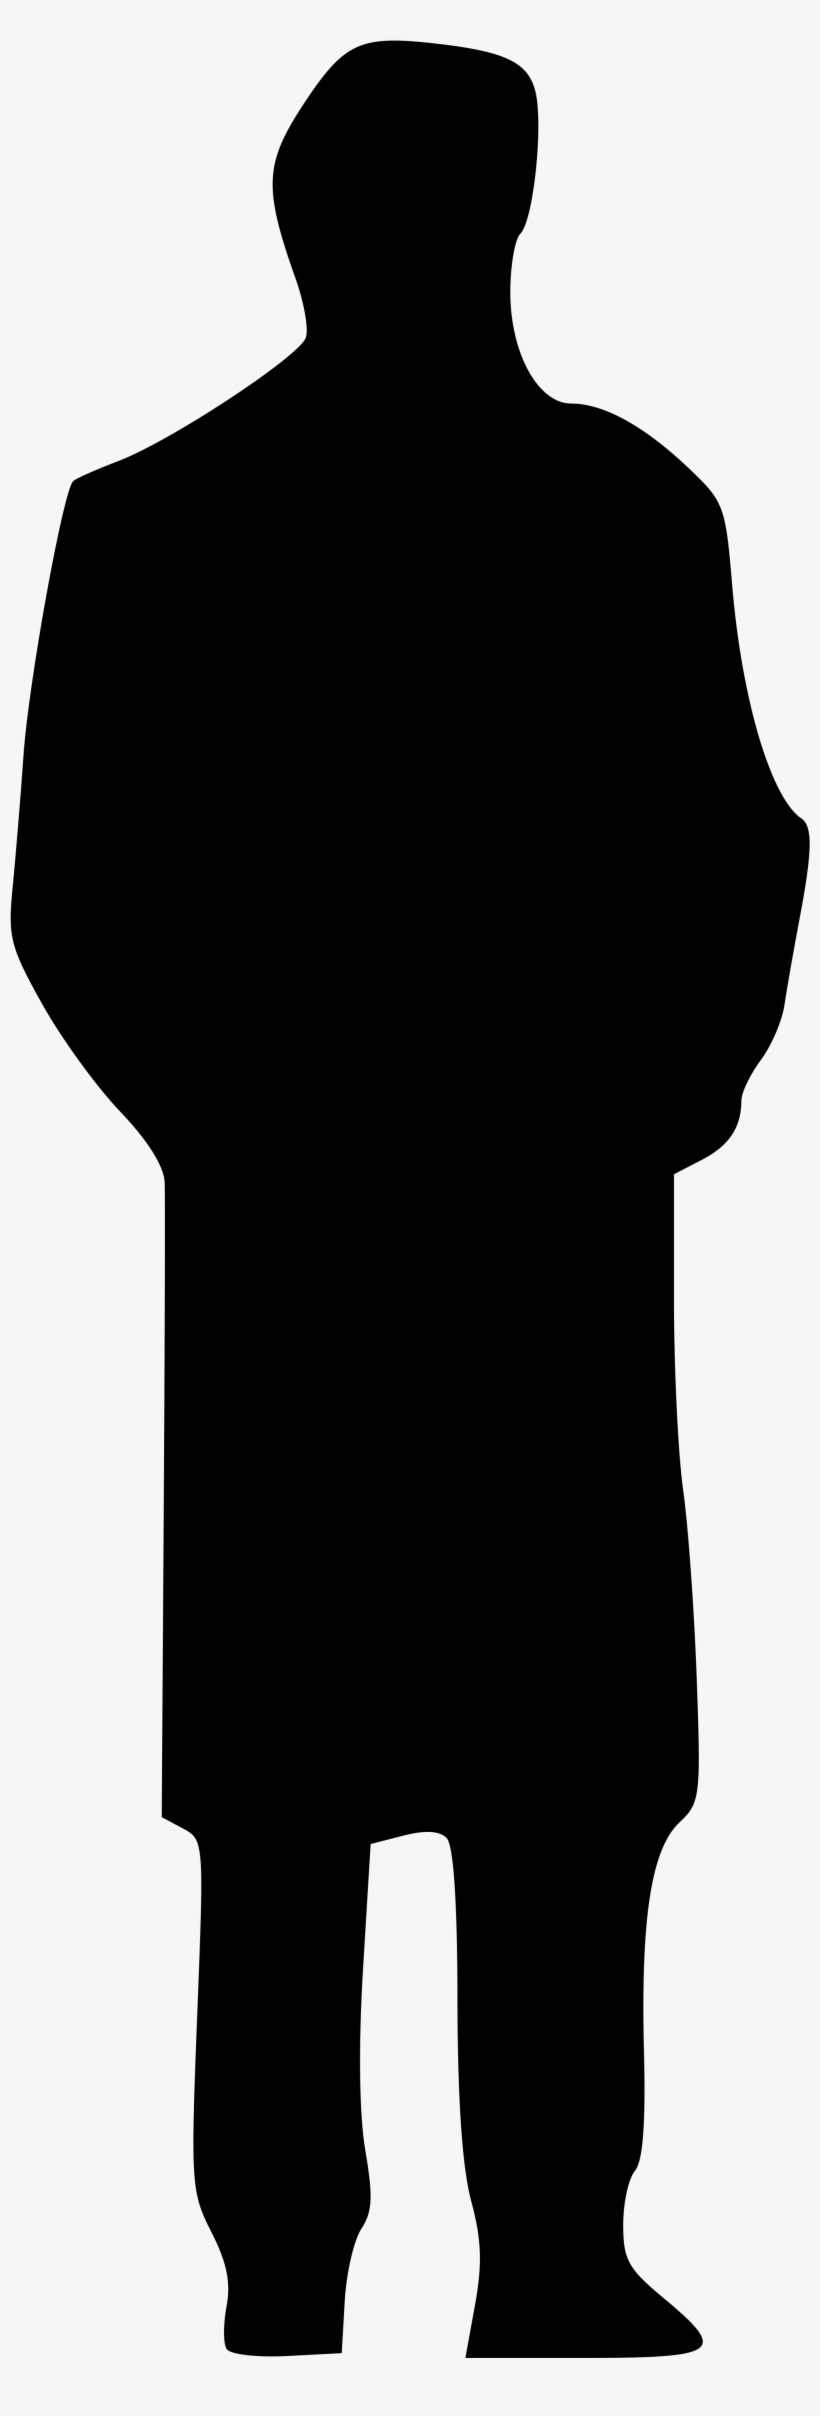 Open - Silhouette Of A Man, transparent png #121365